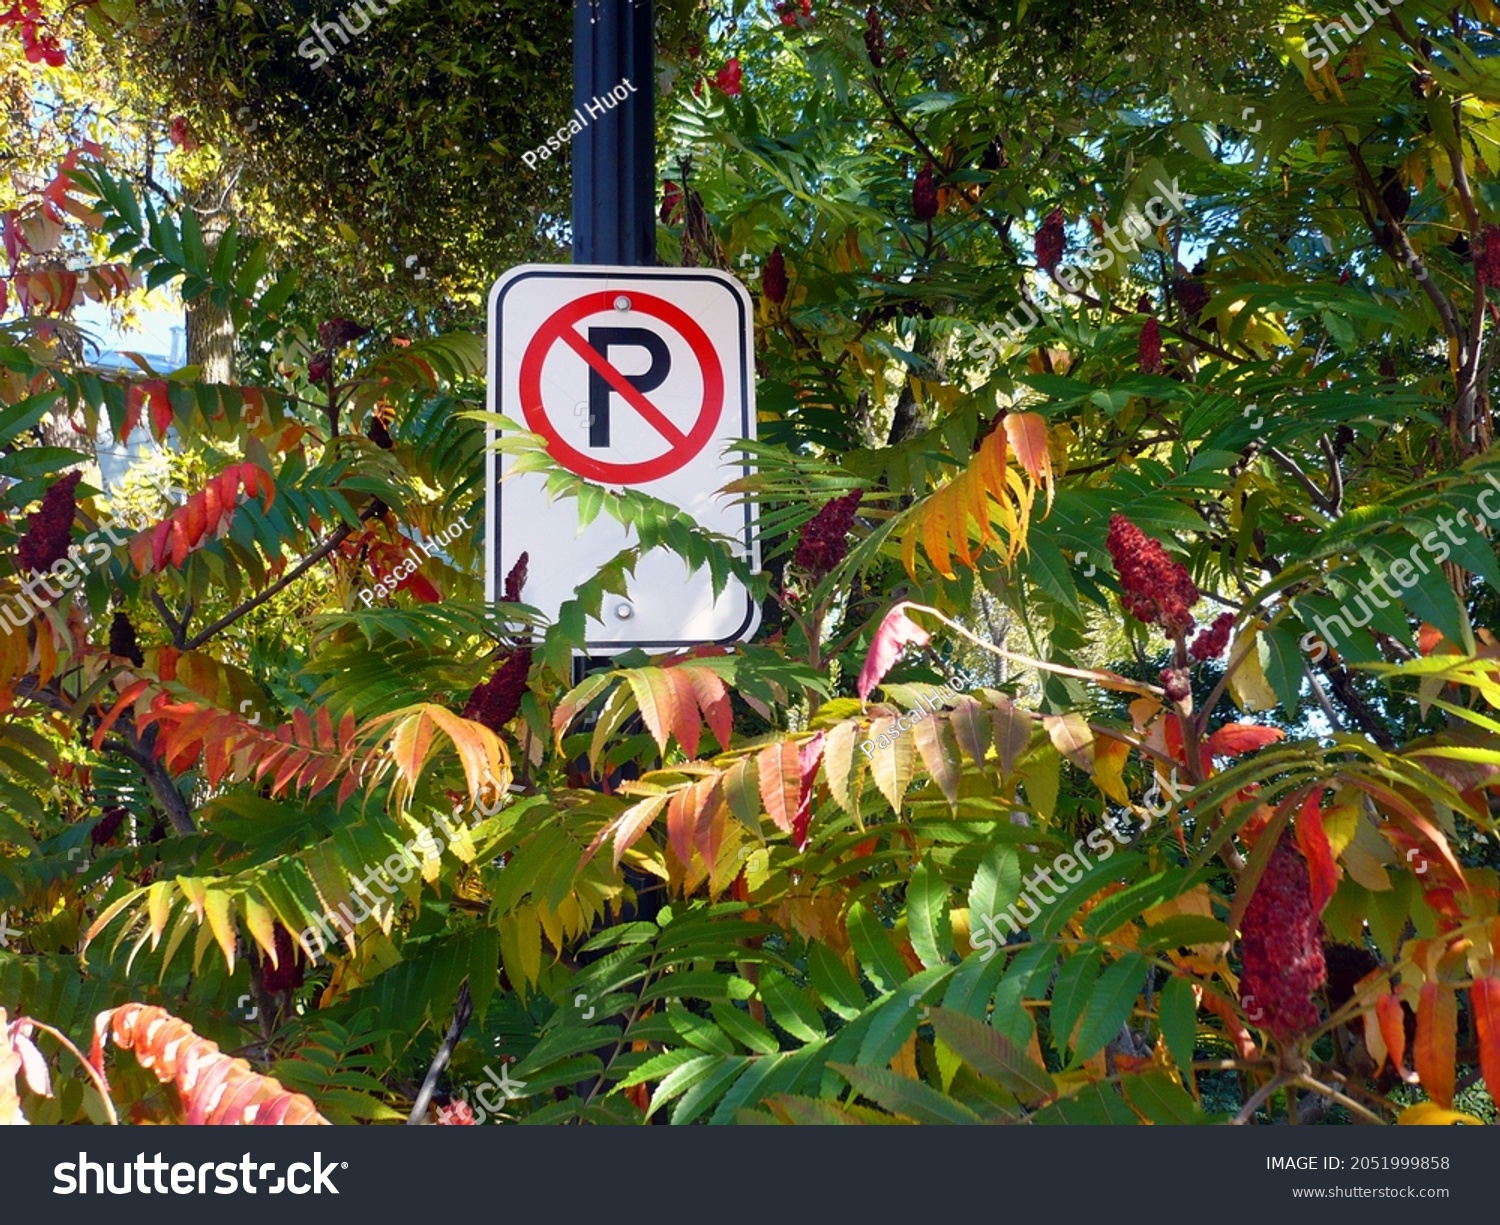 road sign prohibiting parking at this location #2051999858